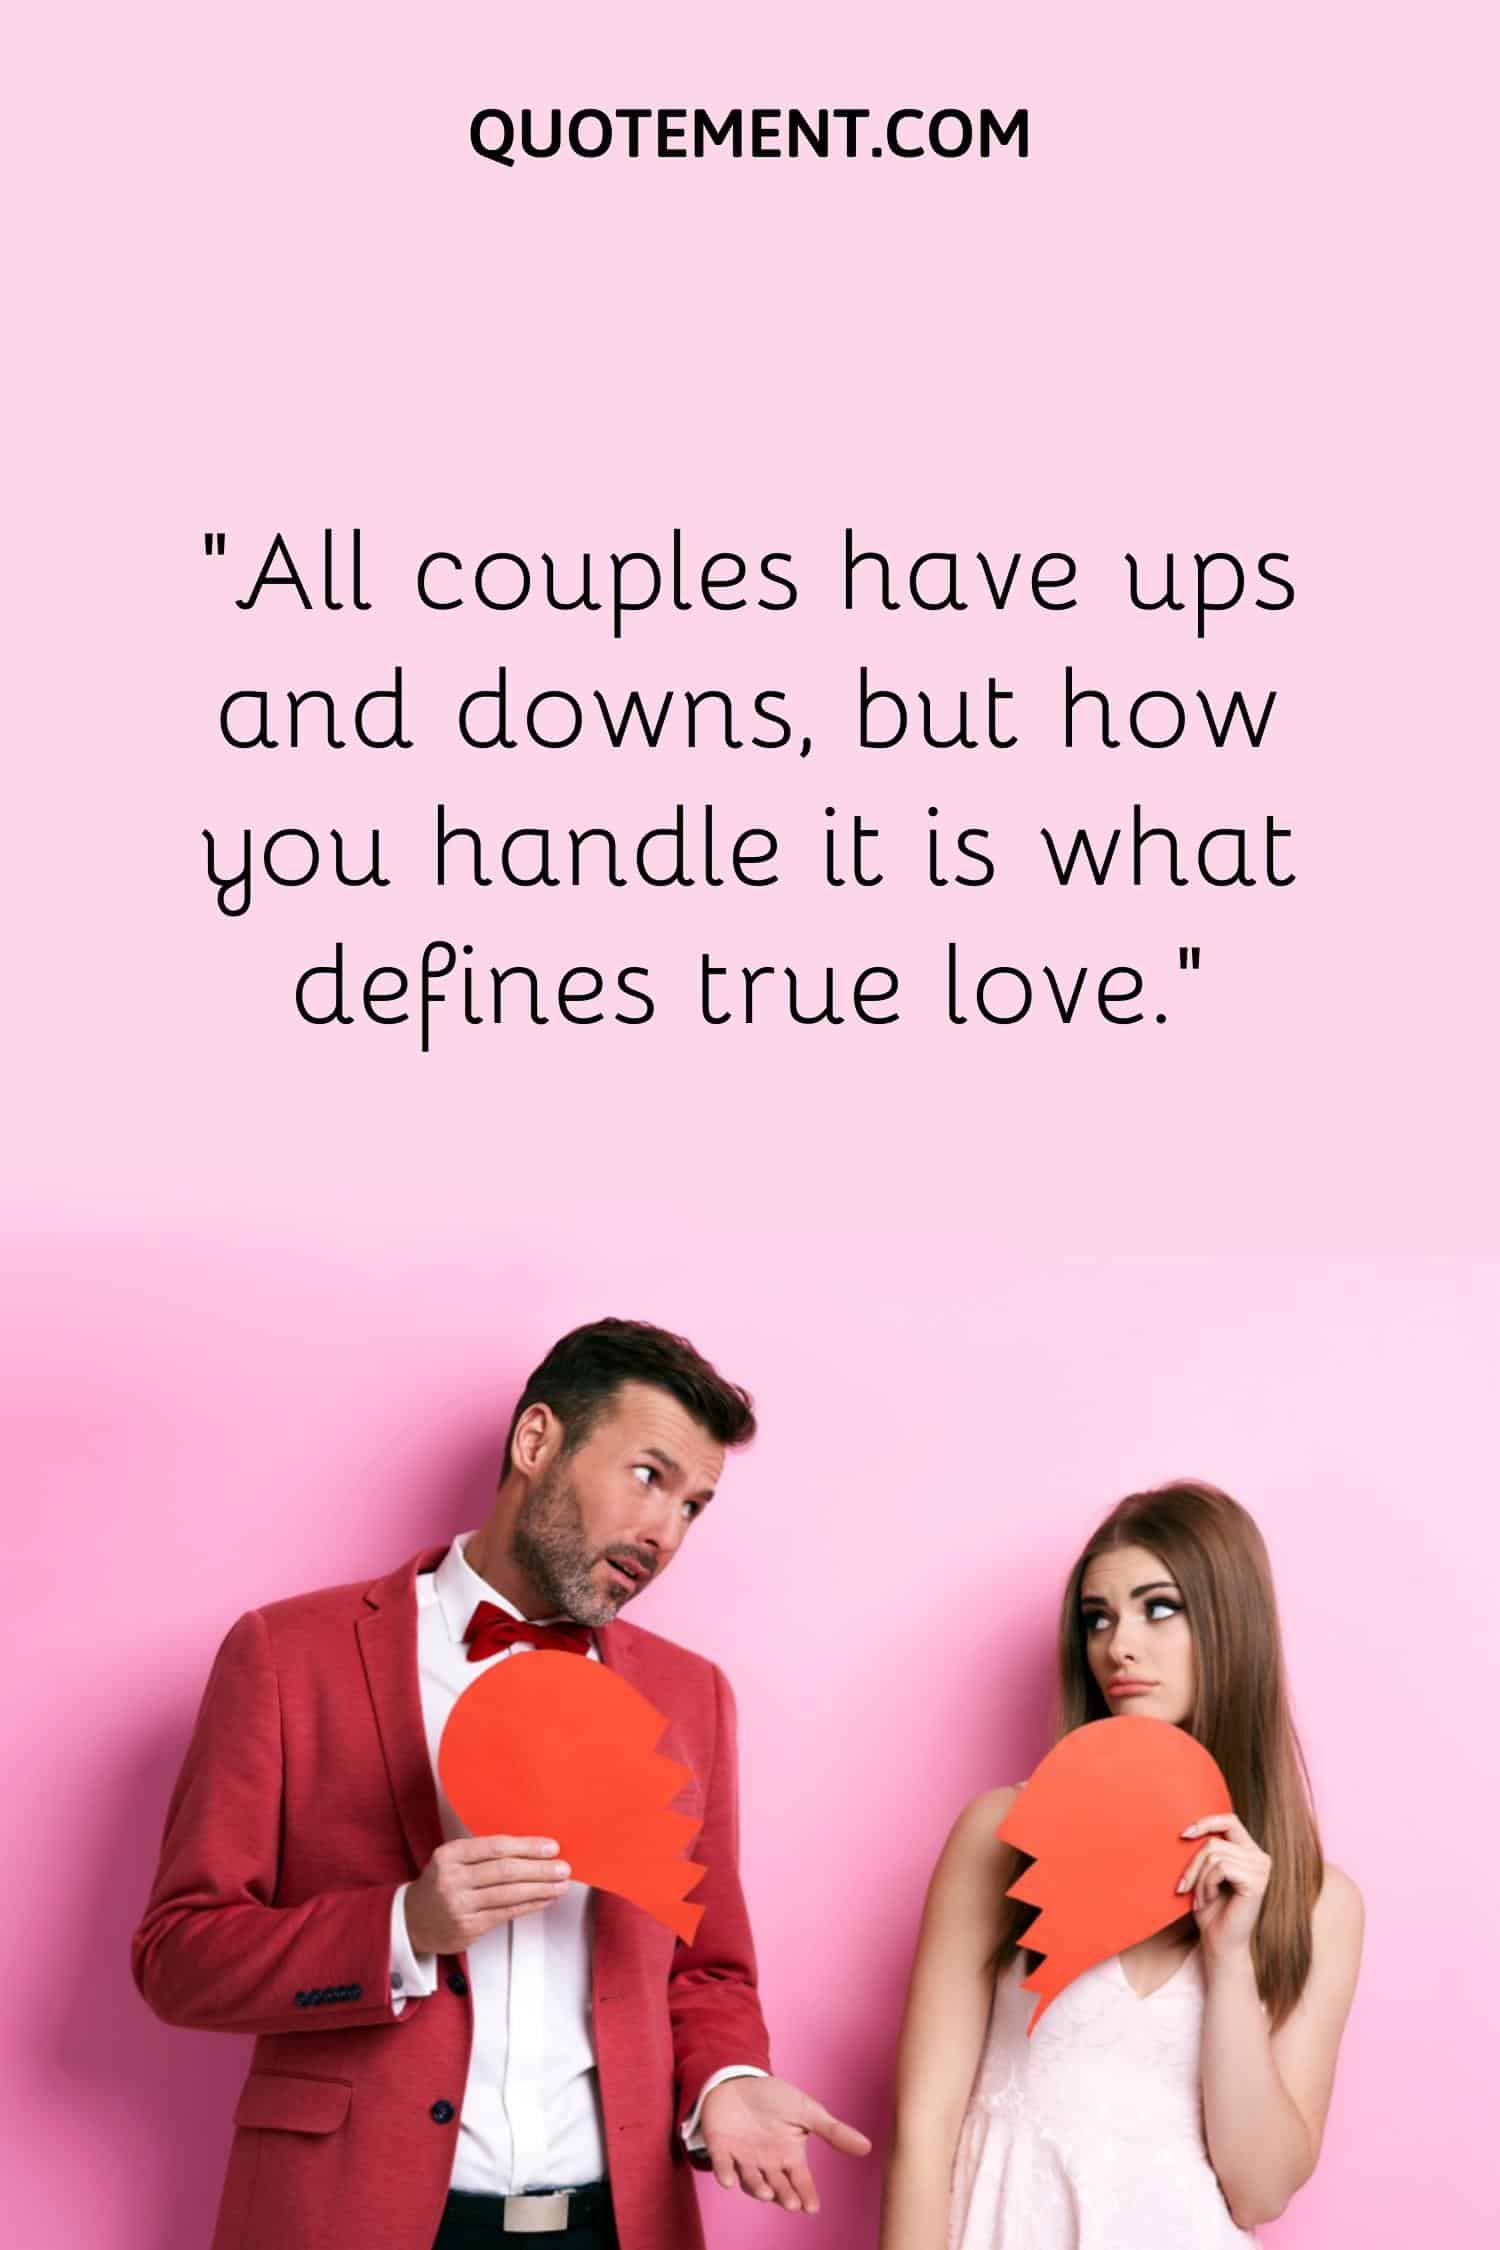 “All couples have ups and downs, but how you handle it is what defines true love.”